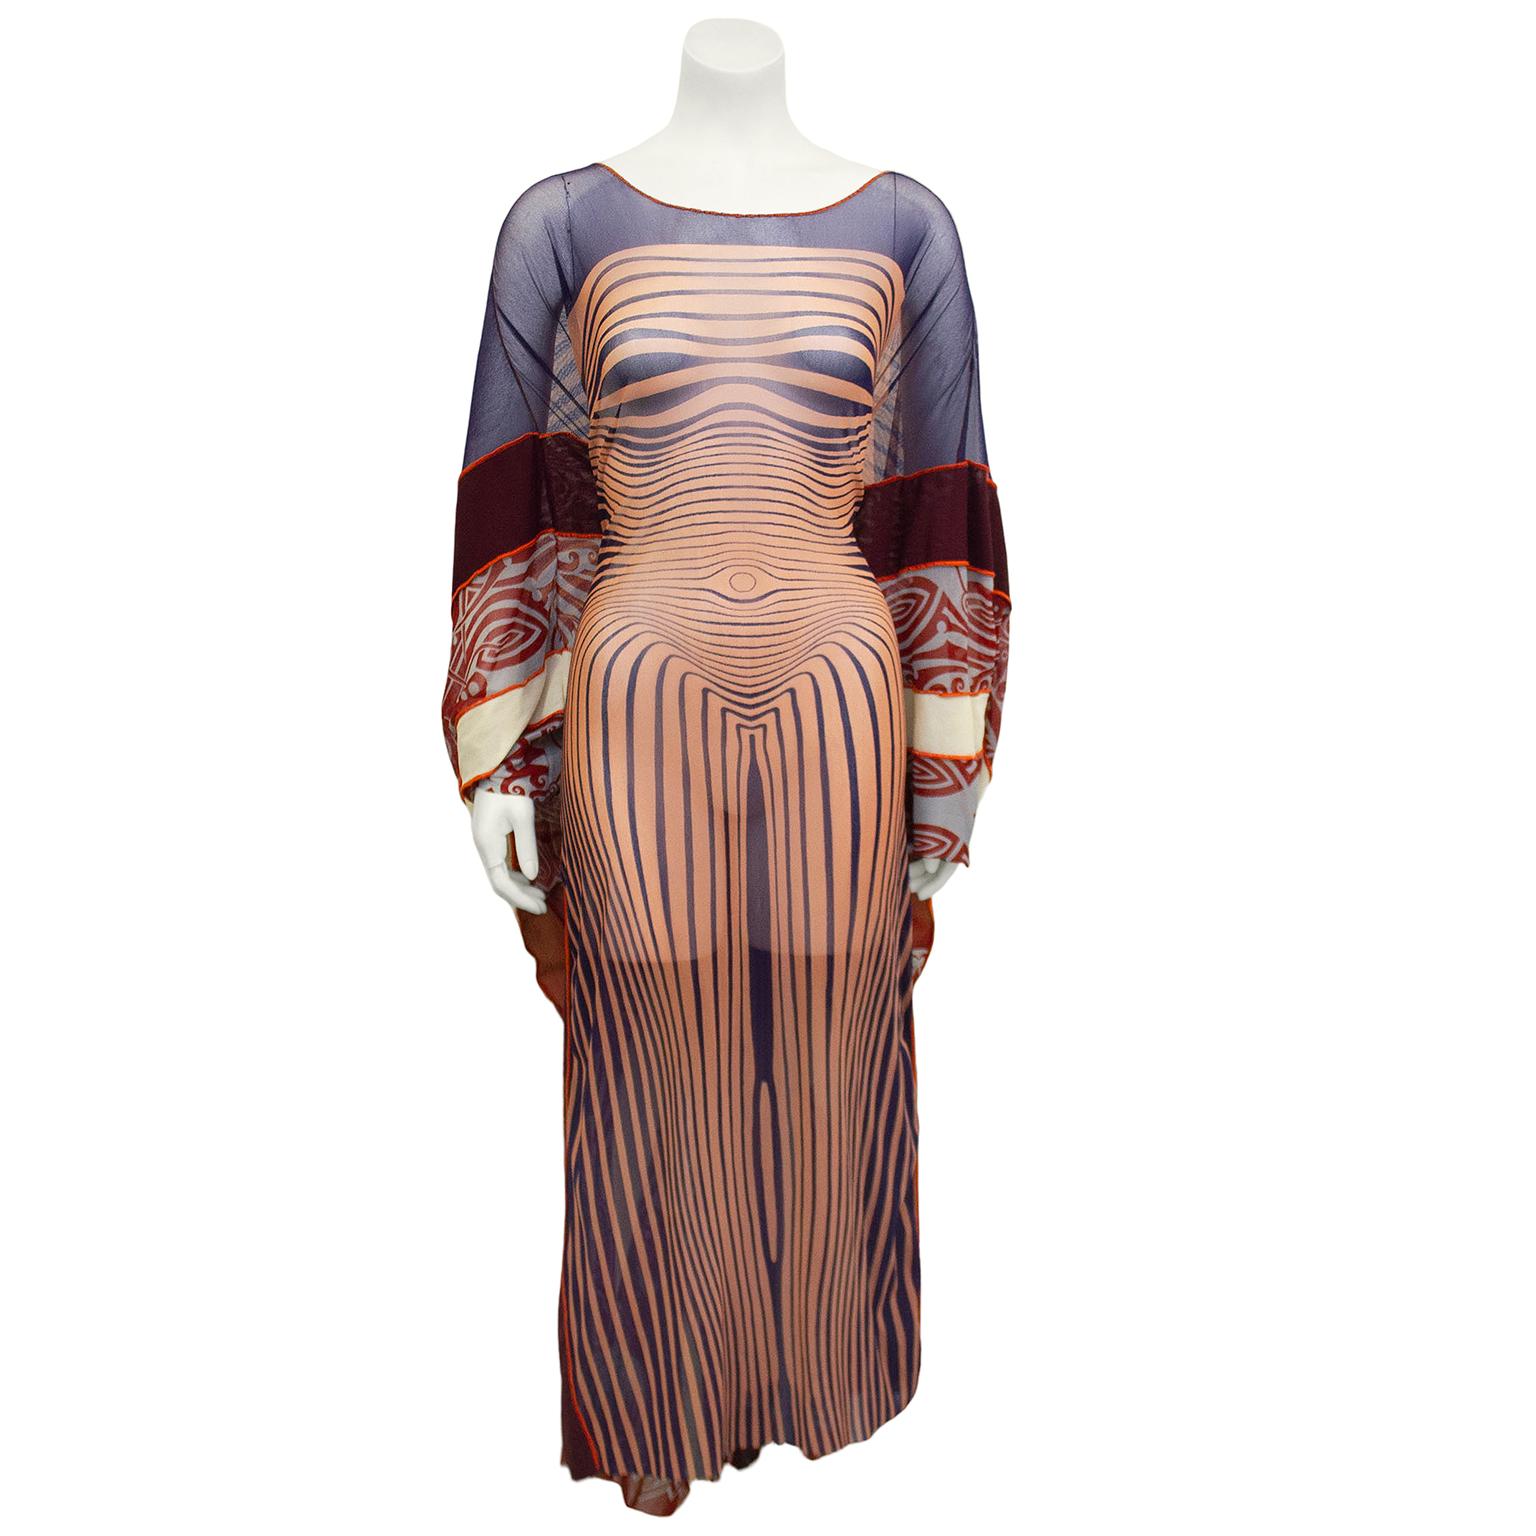 Amazing & rare Jean Paul Gaultier kaftan from the spring/summer 1996 collection. Sheer mesh maxi kaftan dress featuring the iconic Gaultier body contour illusion print and tribal tattoo design details. Shoulders feature deep purple mesh that